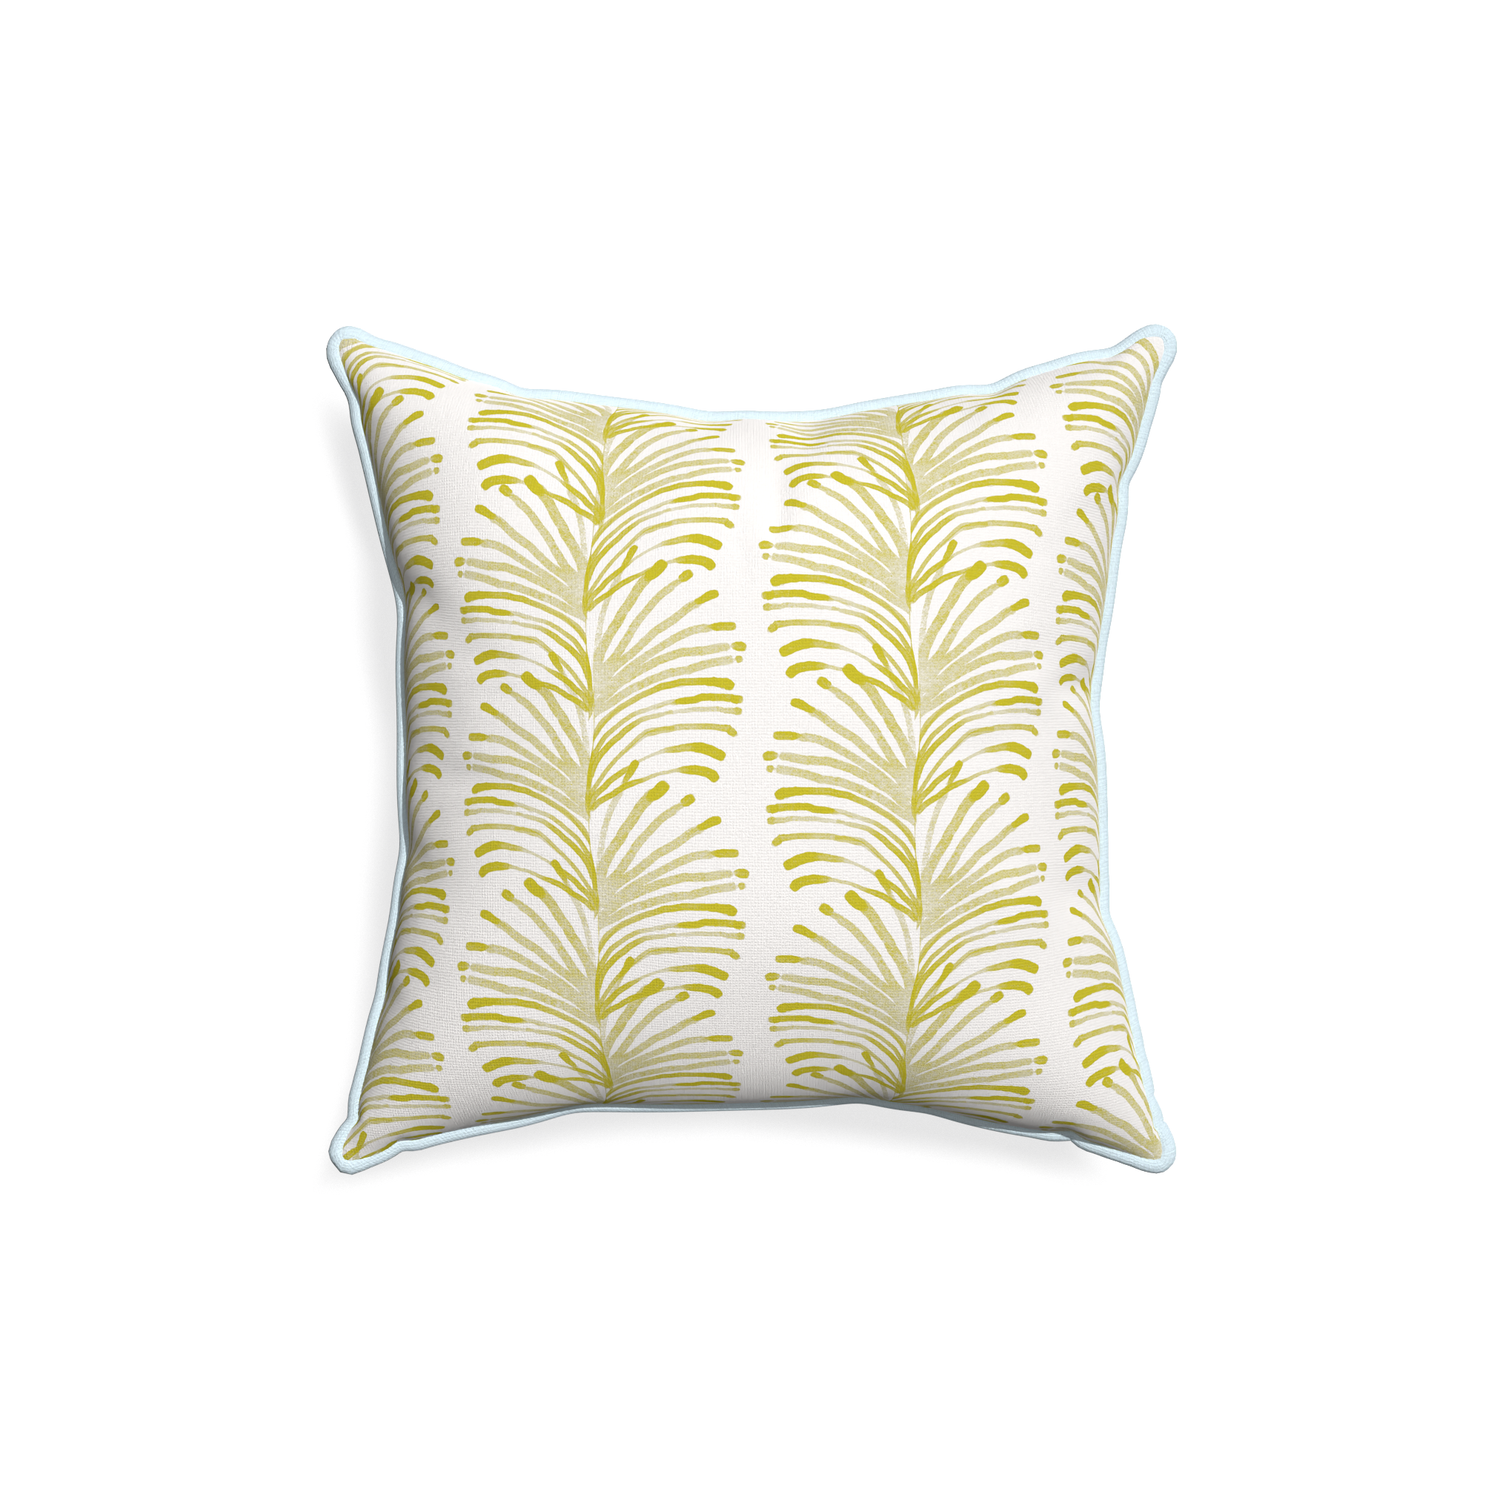 18-square emma chartreuse custom pillow with powder piping on white background